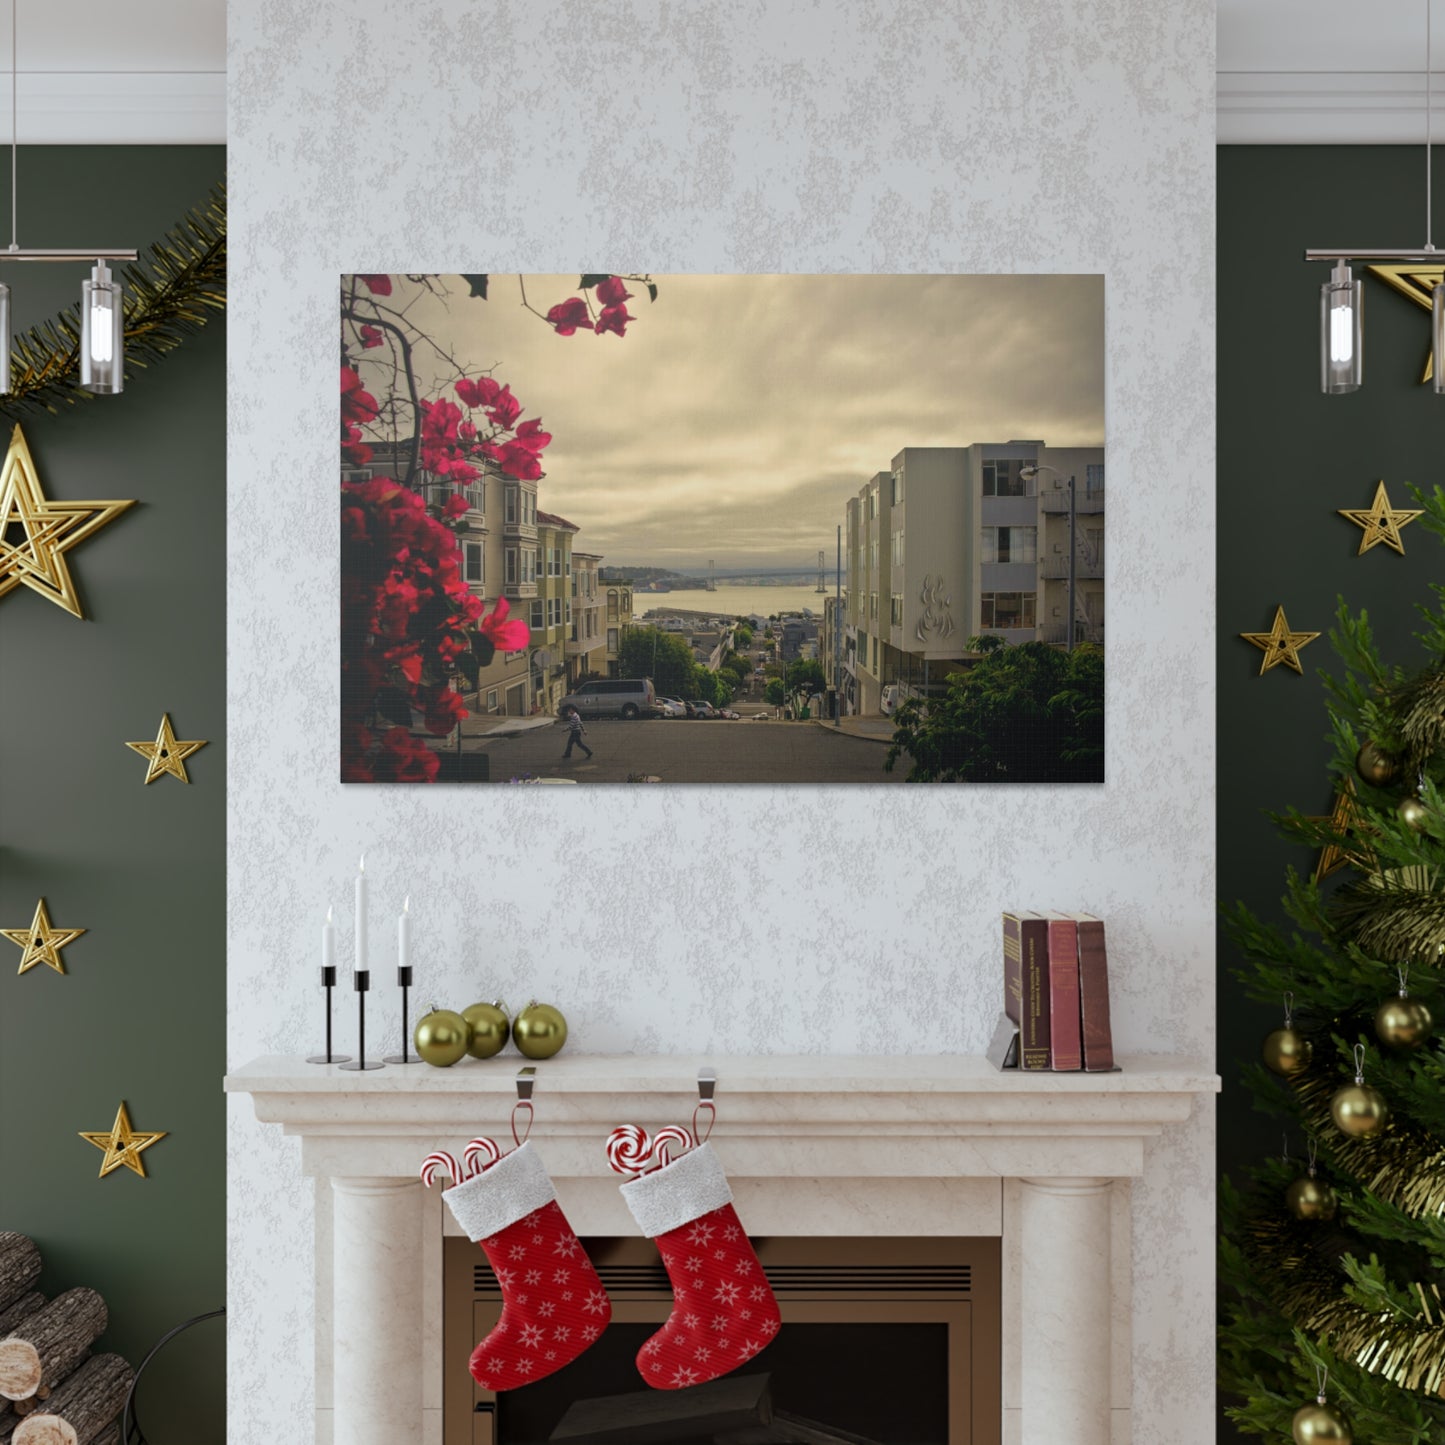 Canvas Print Of Vallejo And Montgomery Street In San Francisco For Wall Art